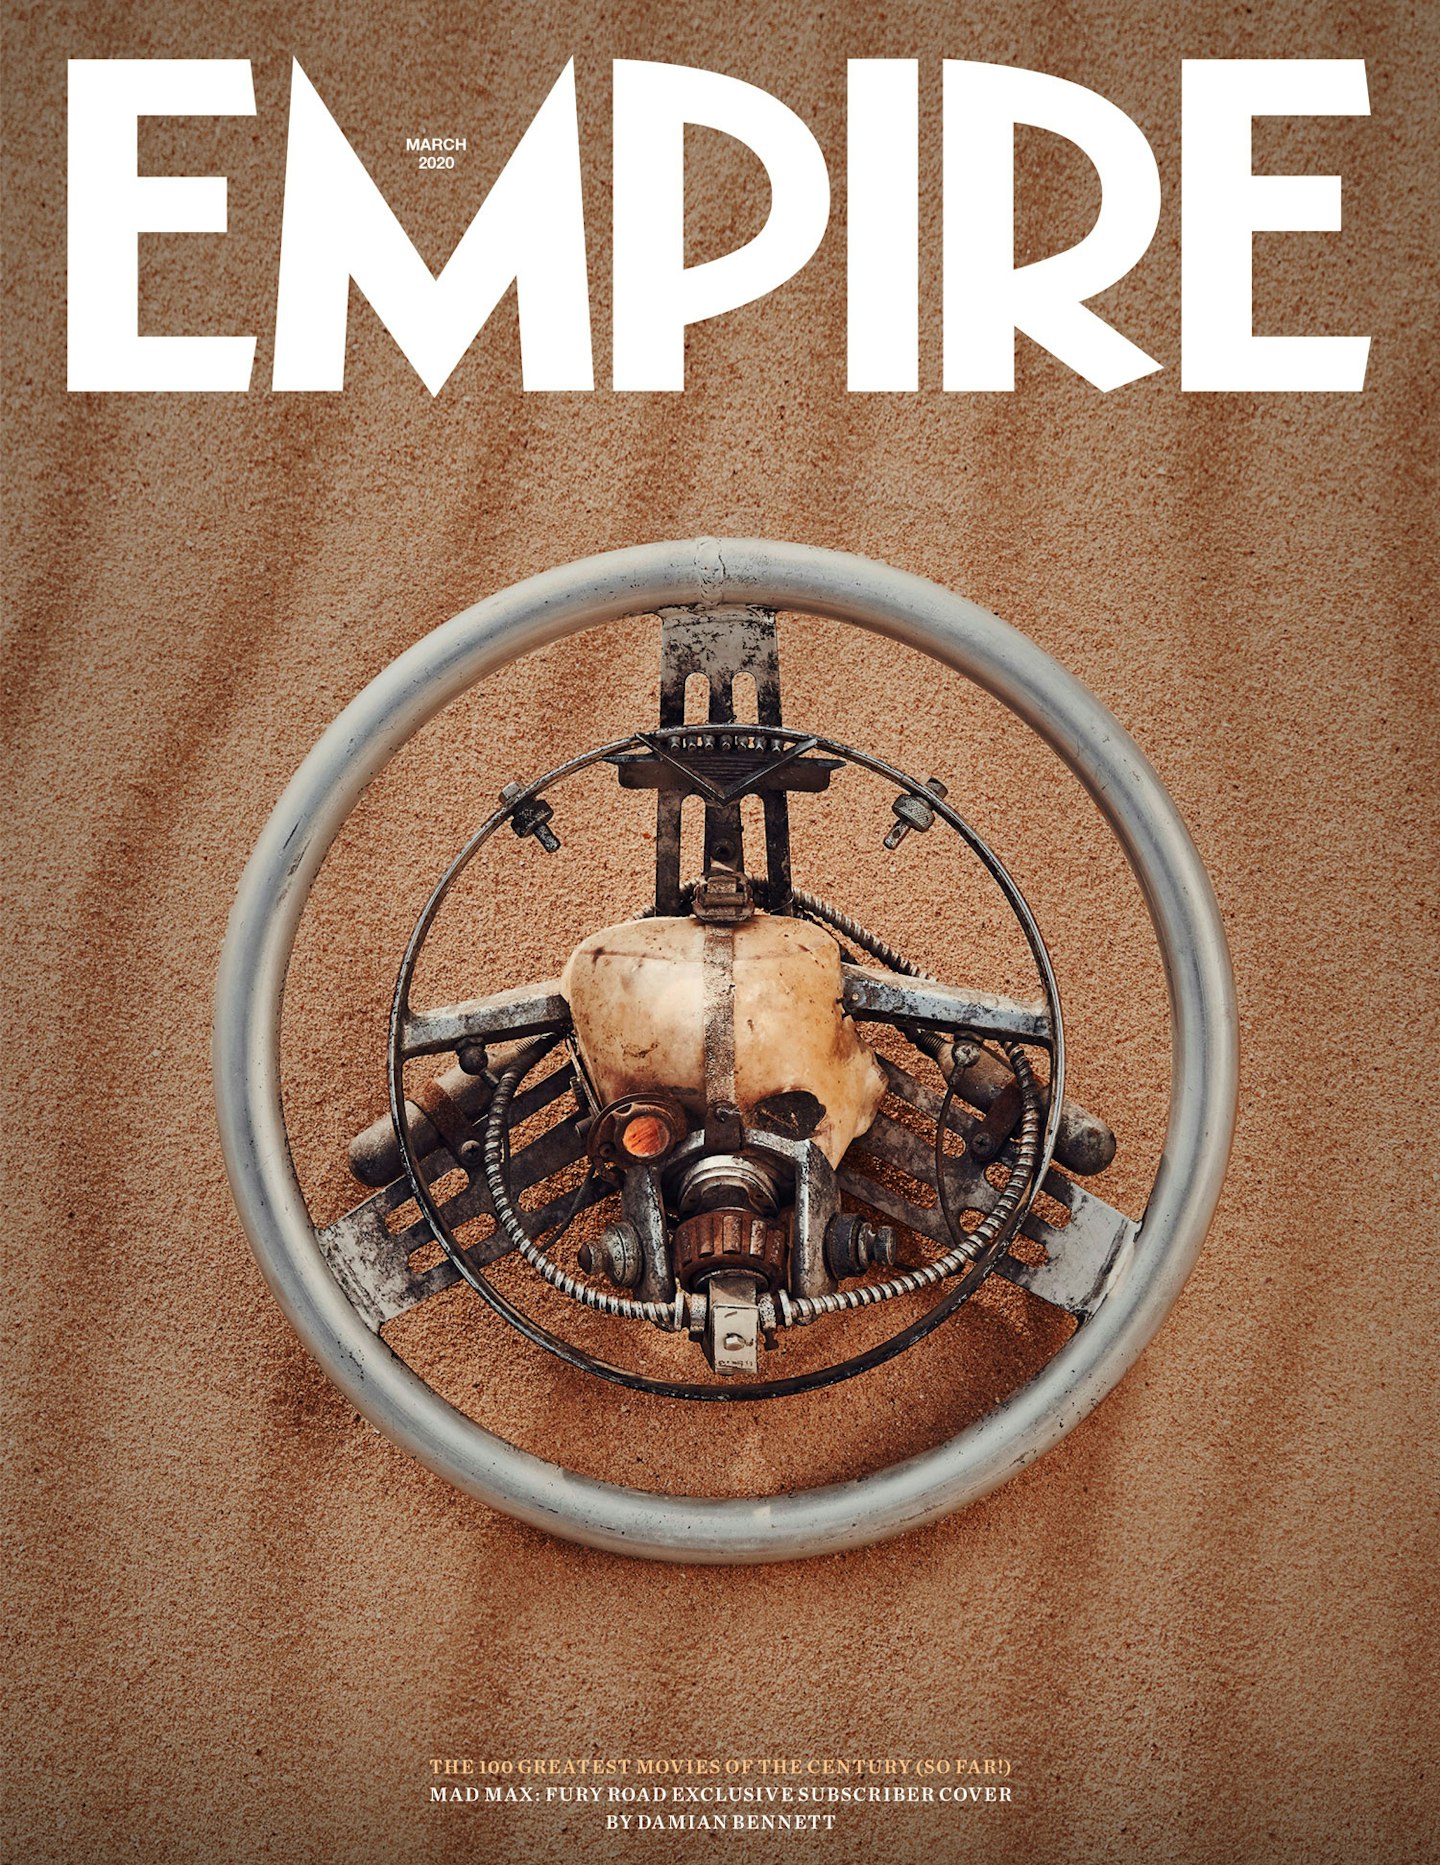 Empire – March 2020 subscriber covers